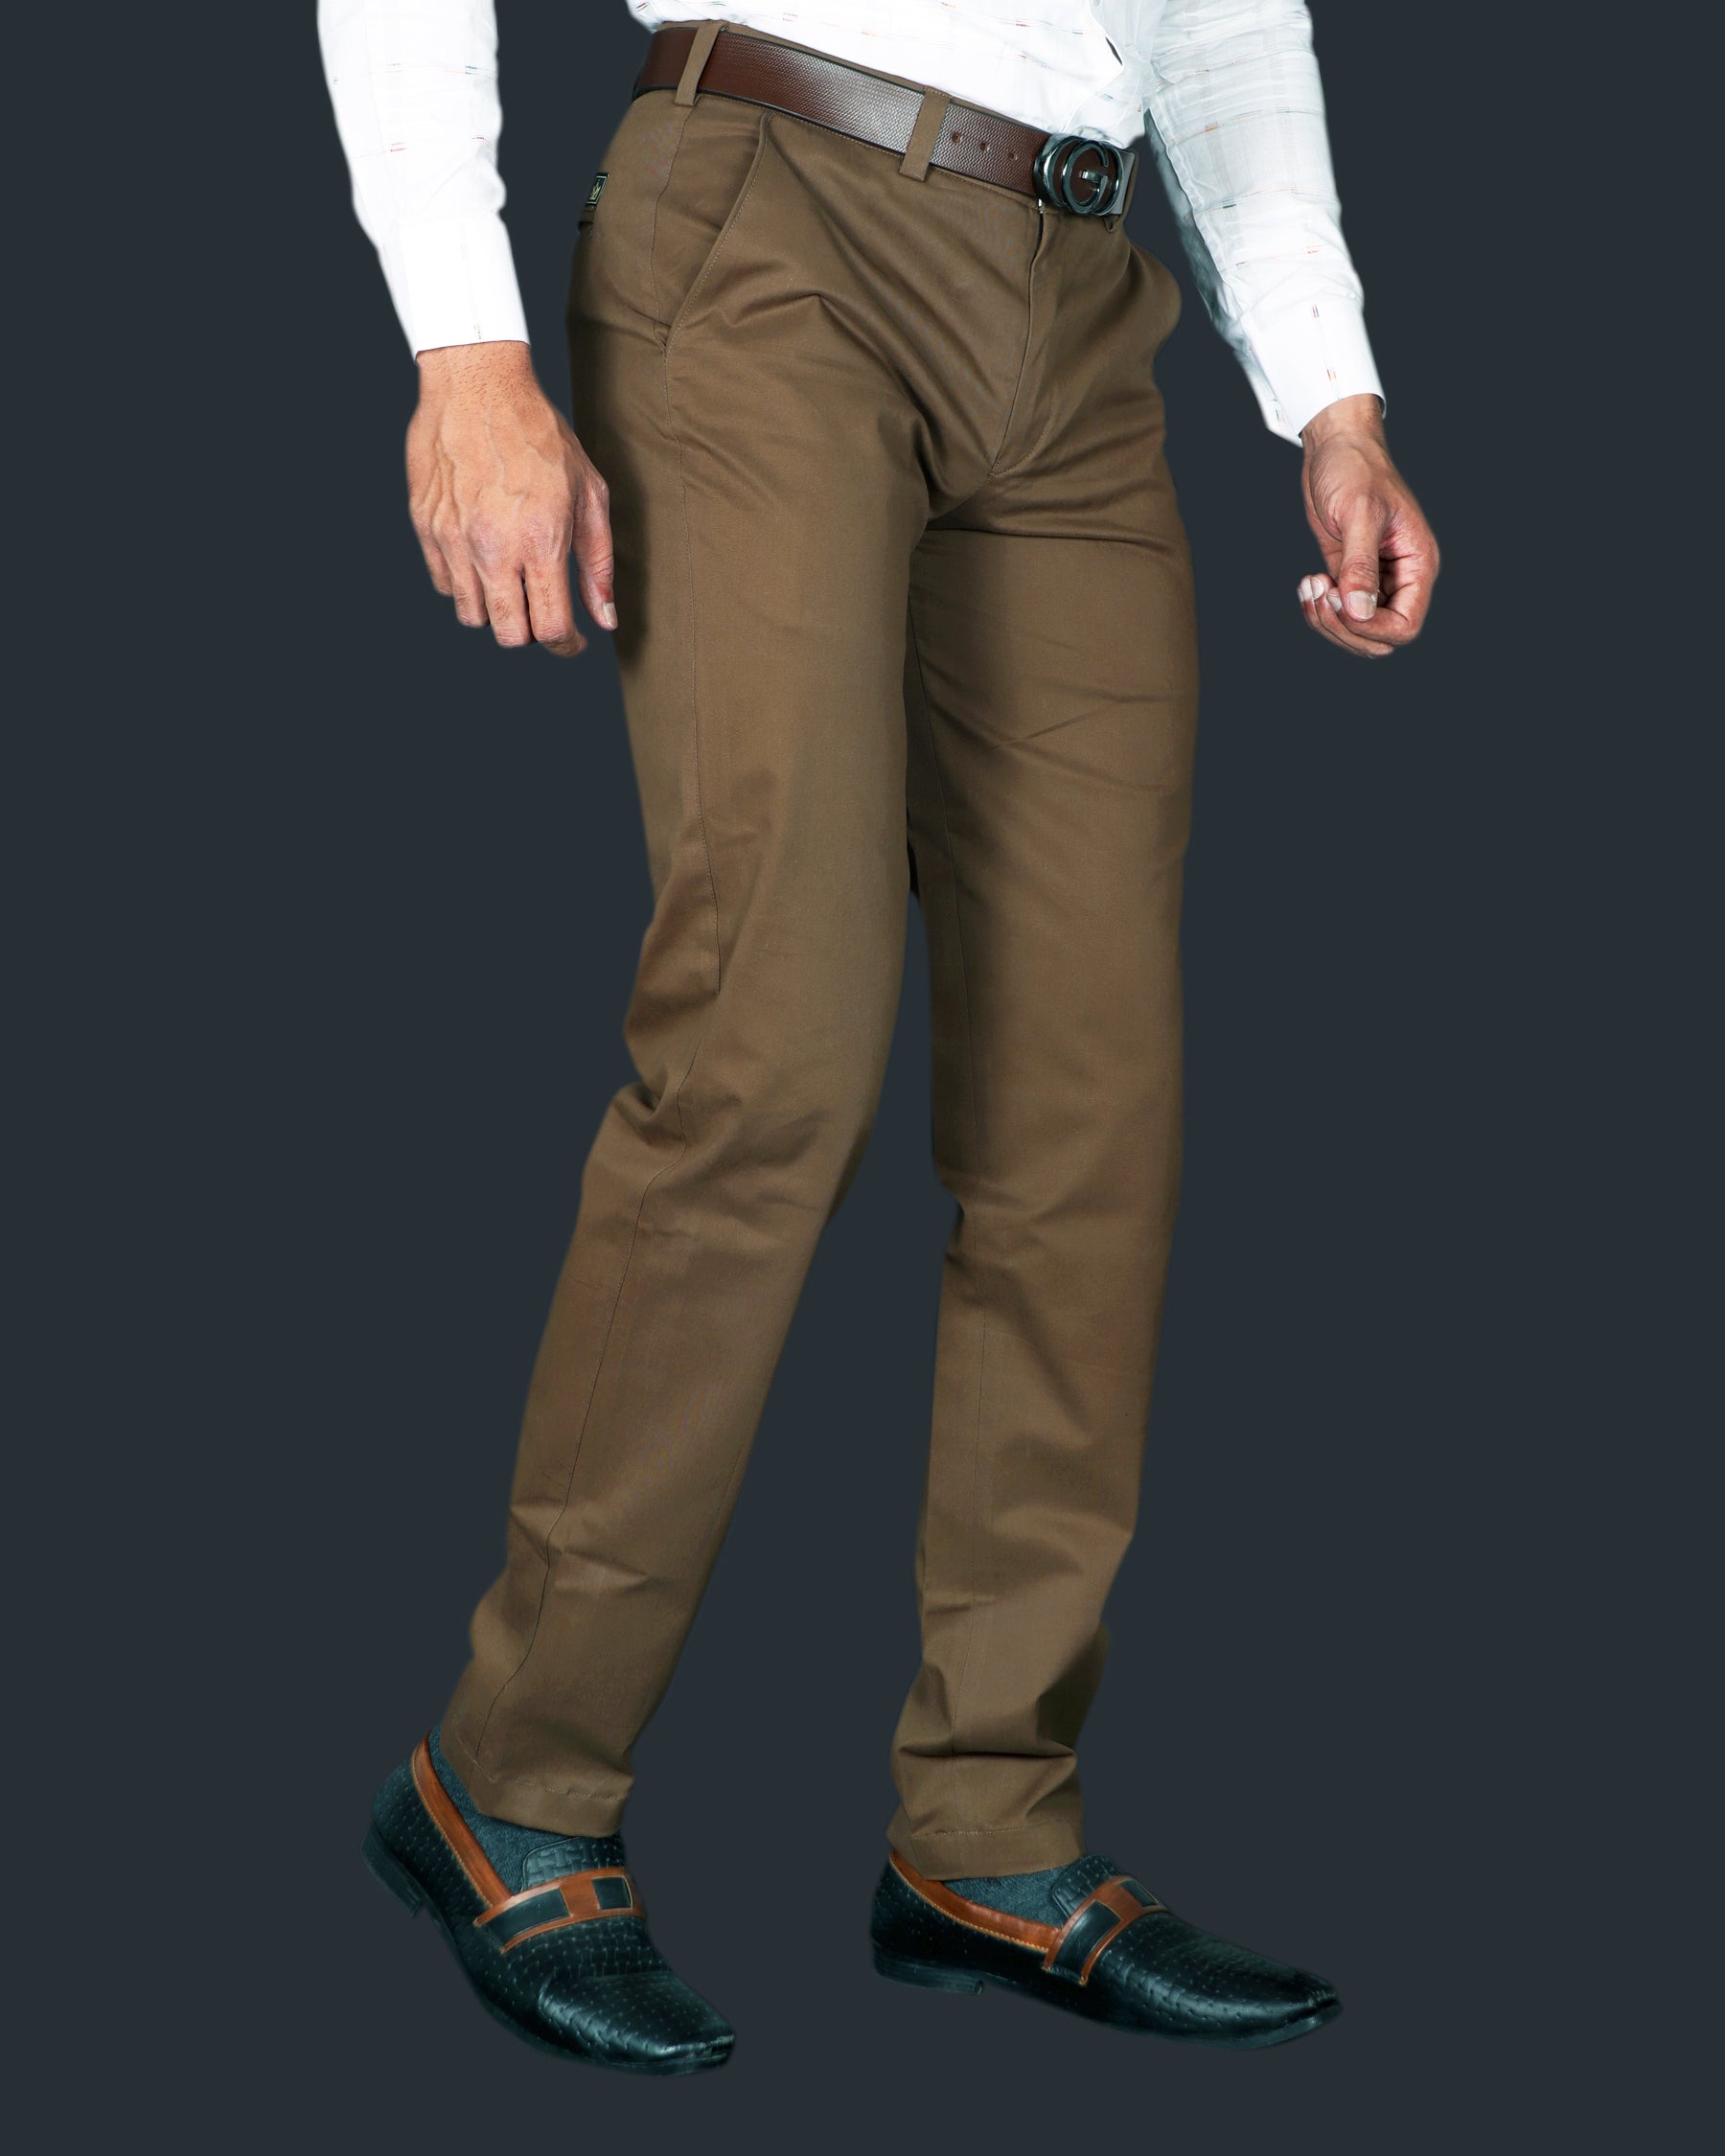 professional trousers